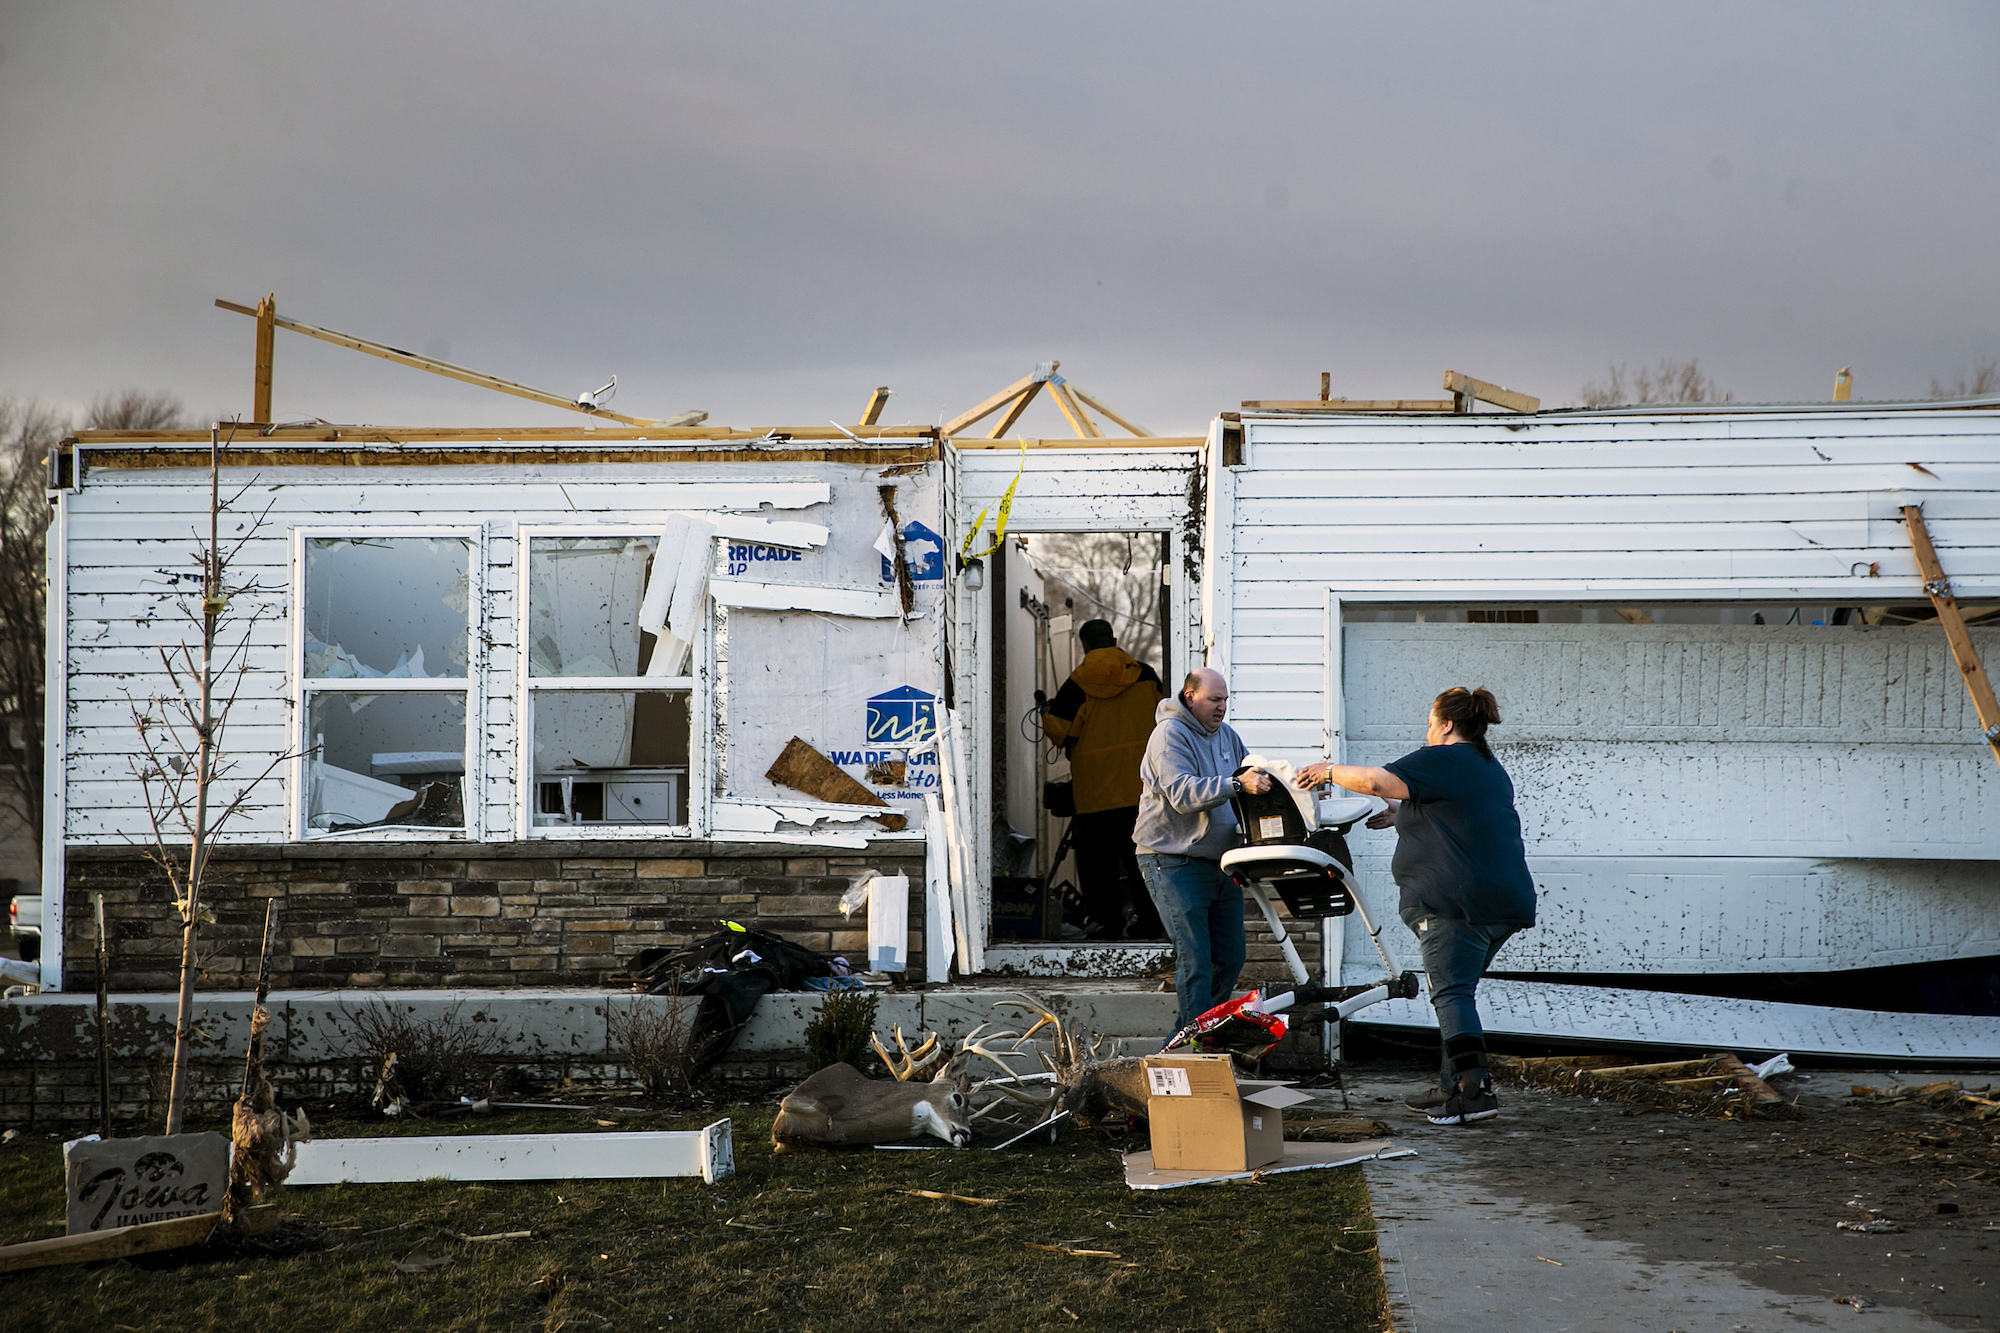 People help remove personal items from a storm damaged home after a tornado in Johnson County, Iowa, on Friday.